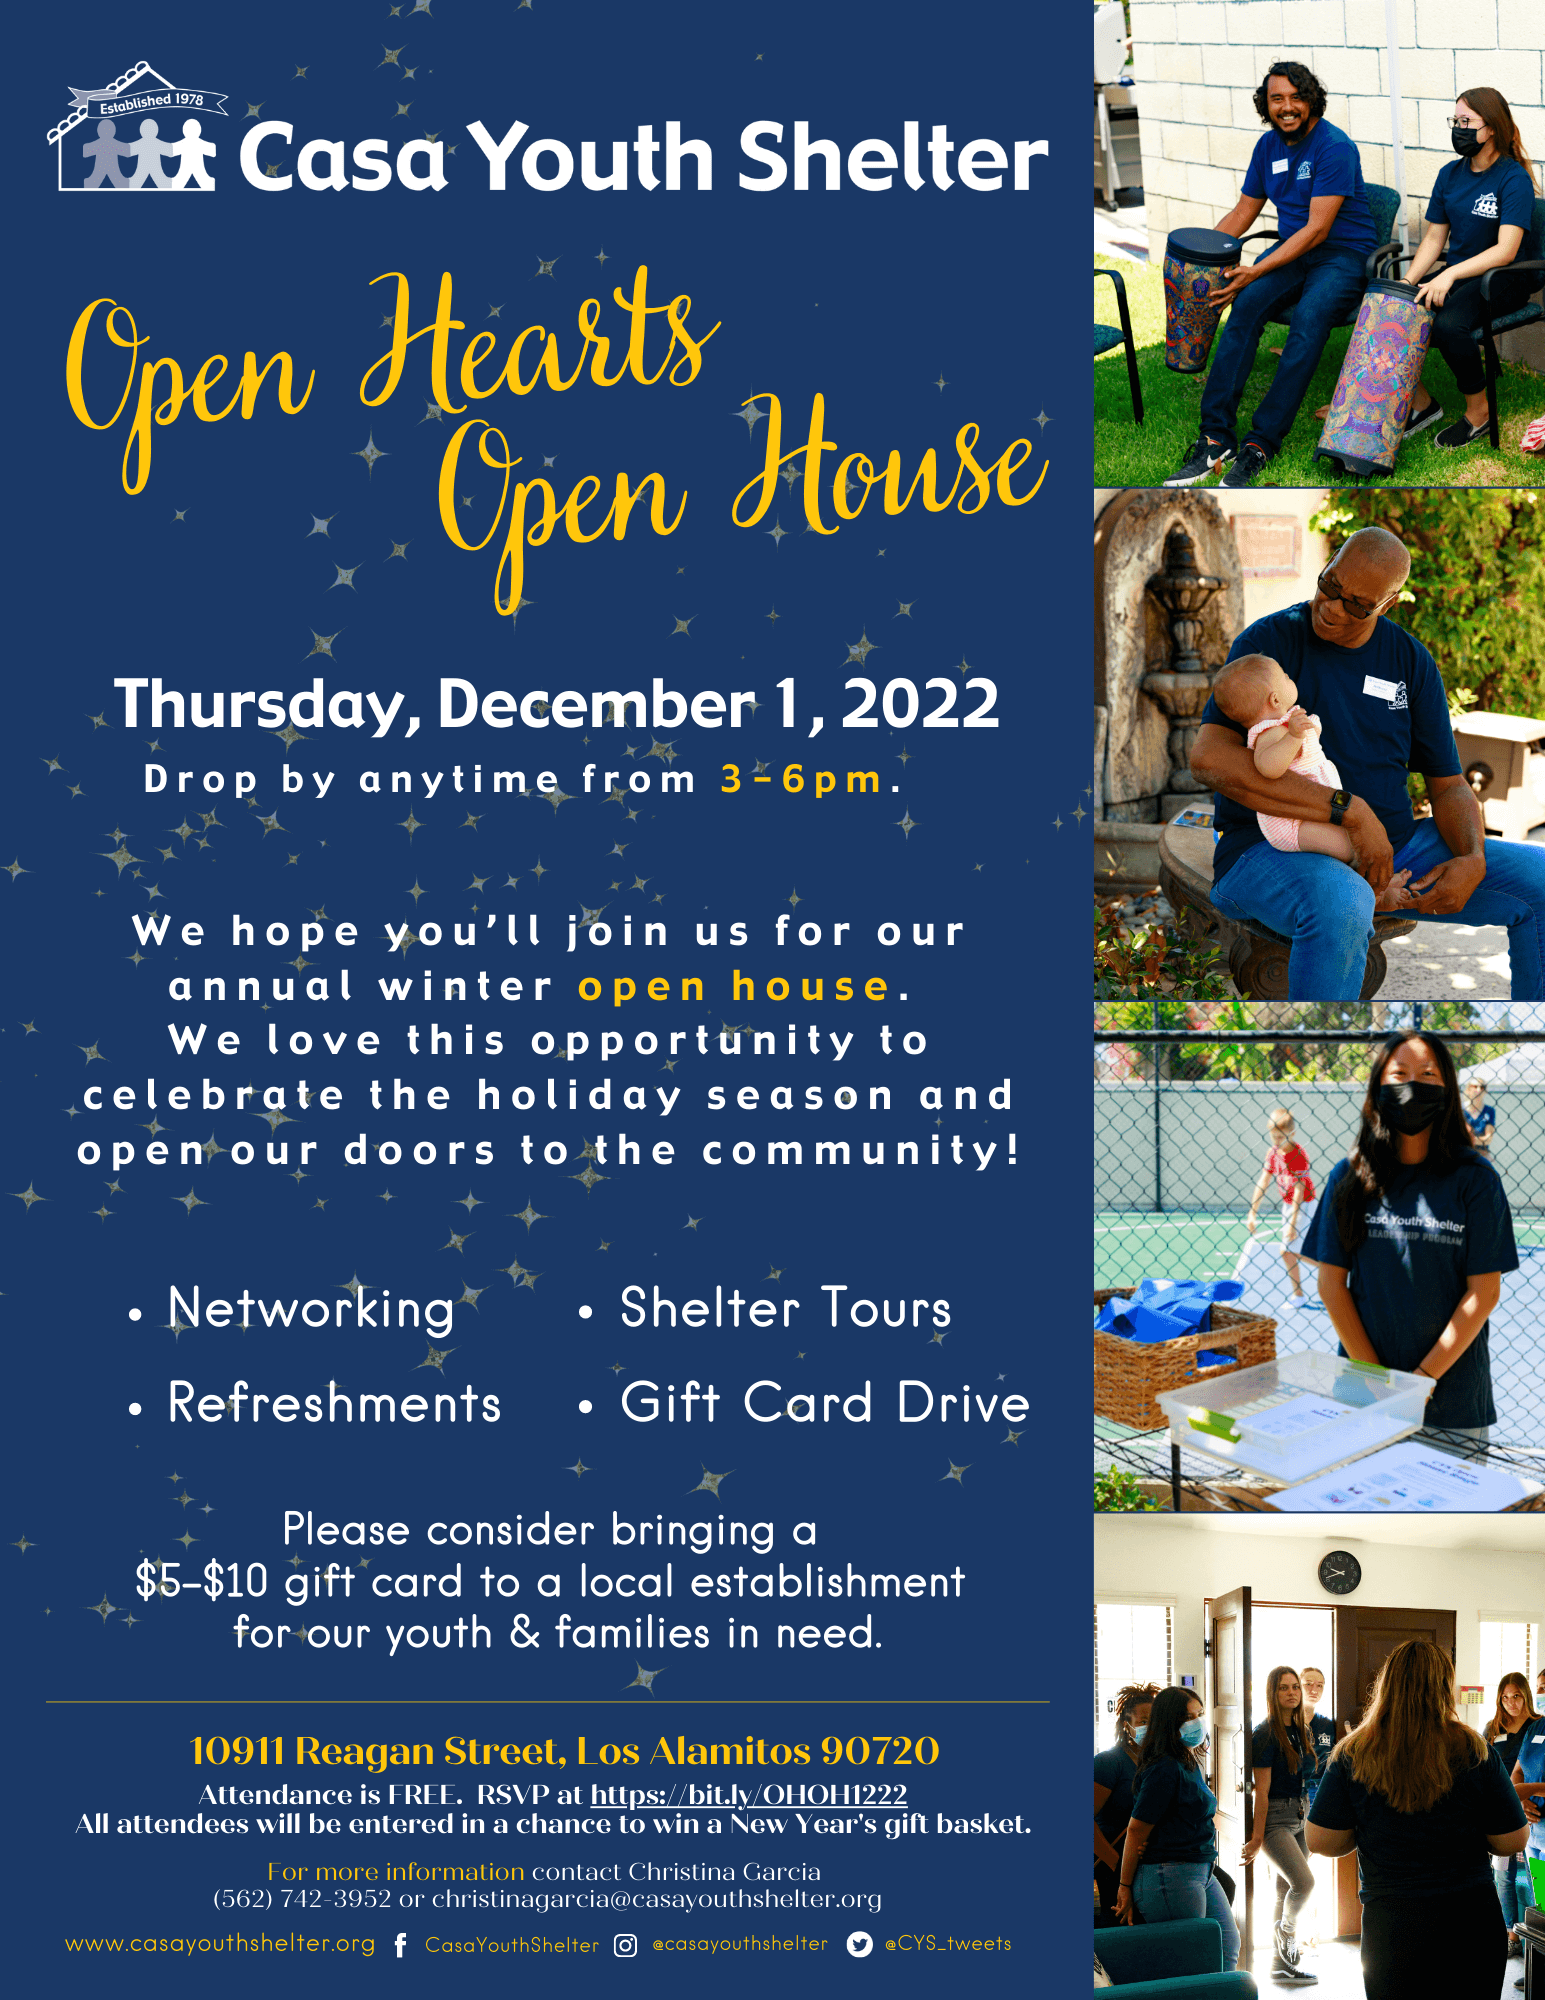 Open Hearts Open House 2022 – Casa Youth Shelter